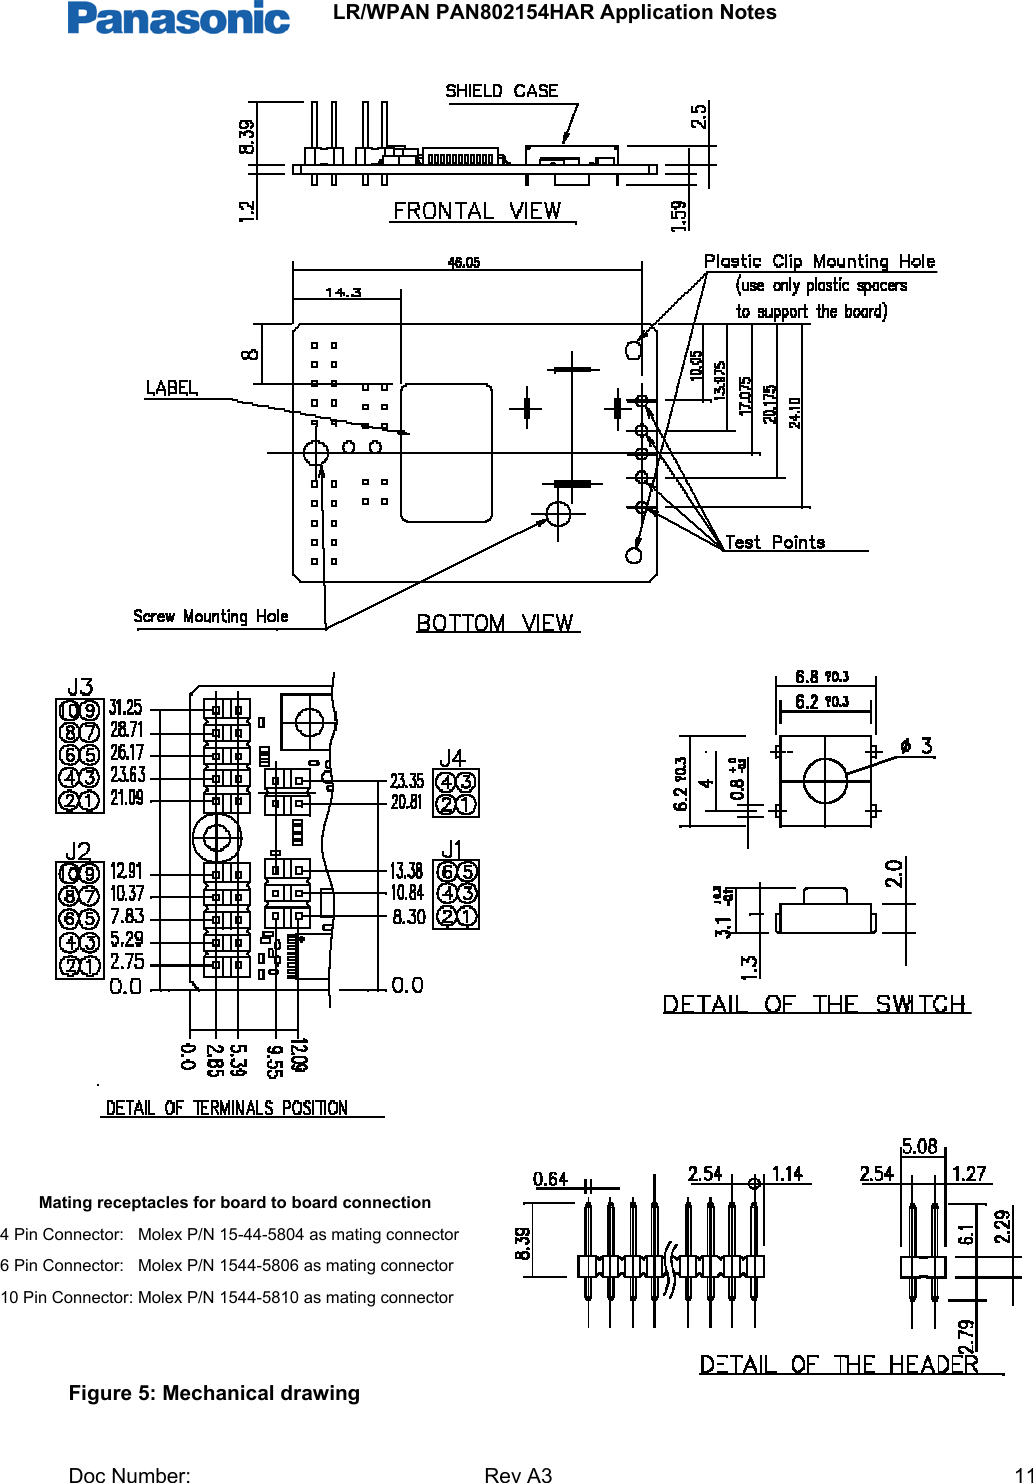                 LR/WPAN PAN802154HAR Application Notes Doc Number:   Rev A3    11                                   Figure 5: Mechanical drawing Mating receptacles for board to board connection 4 Pin Connector:   Molex P/N 15-44-5804 as mating connector 6 Pin Connector:   Molex P/N 1544-5806 as mating connector 10 Pin Connector: Molex P/N 1544-5810 as mating connector 